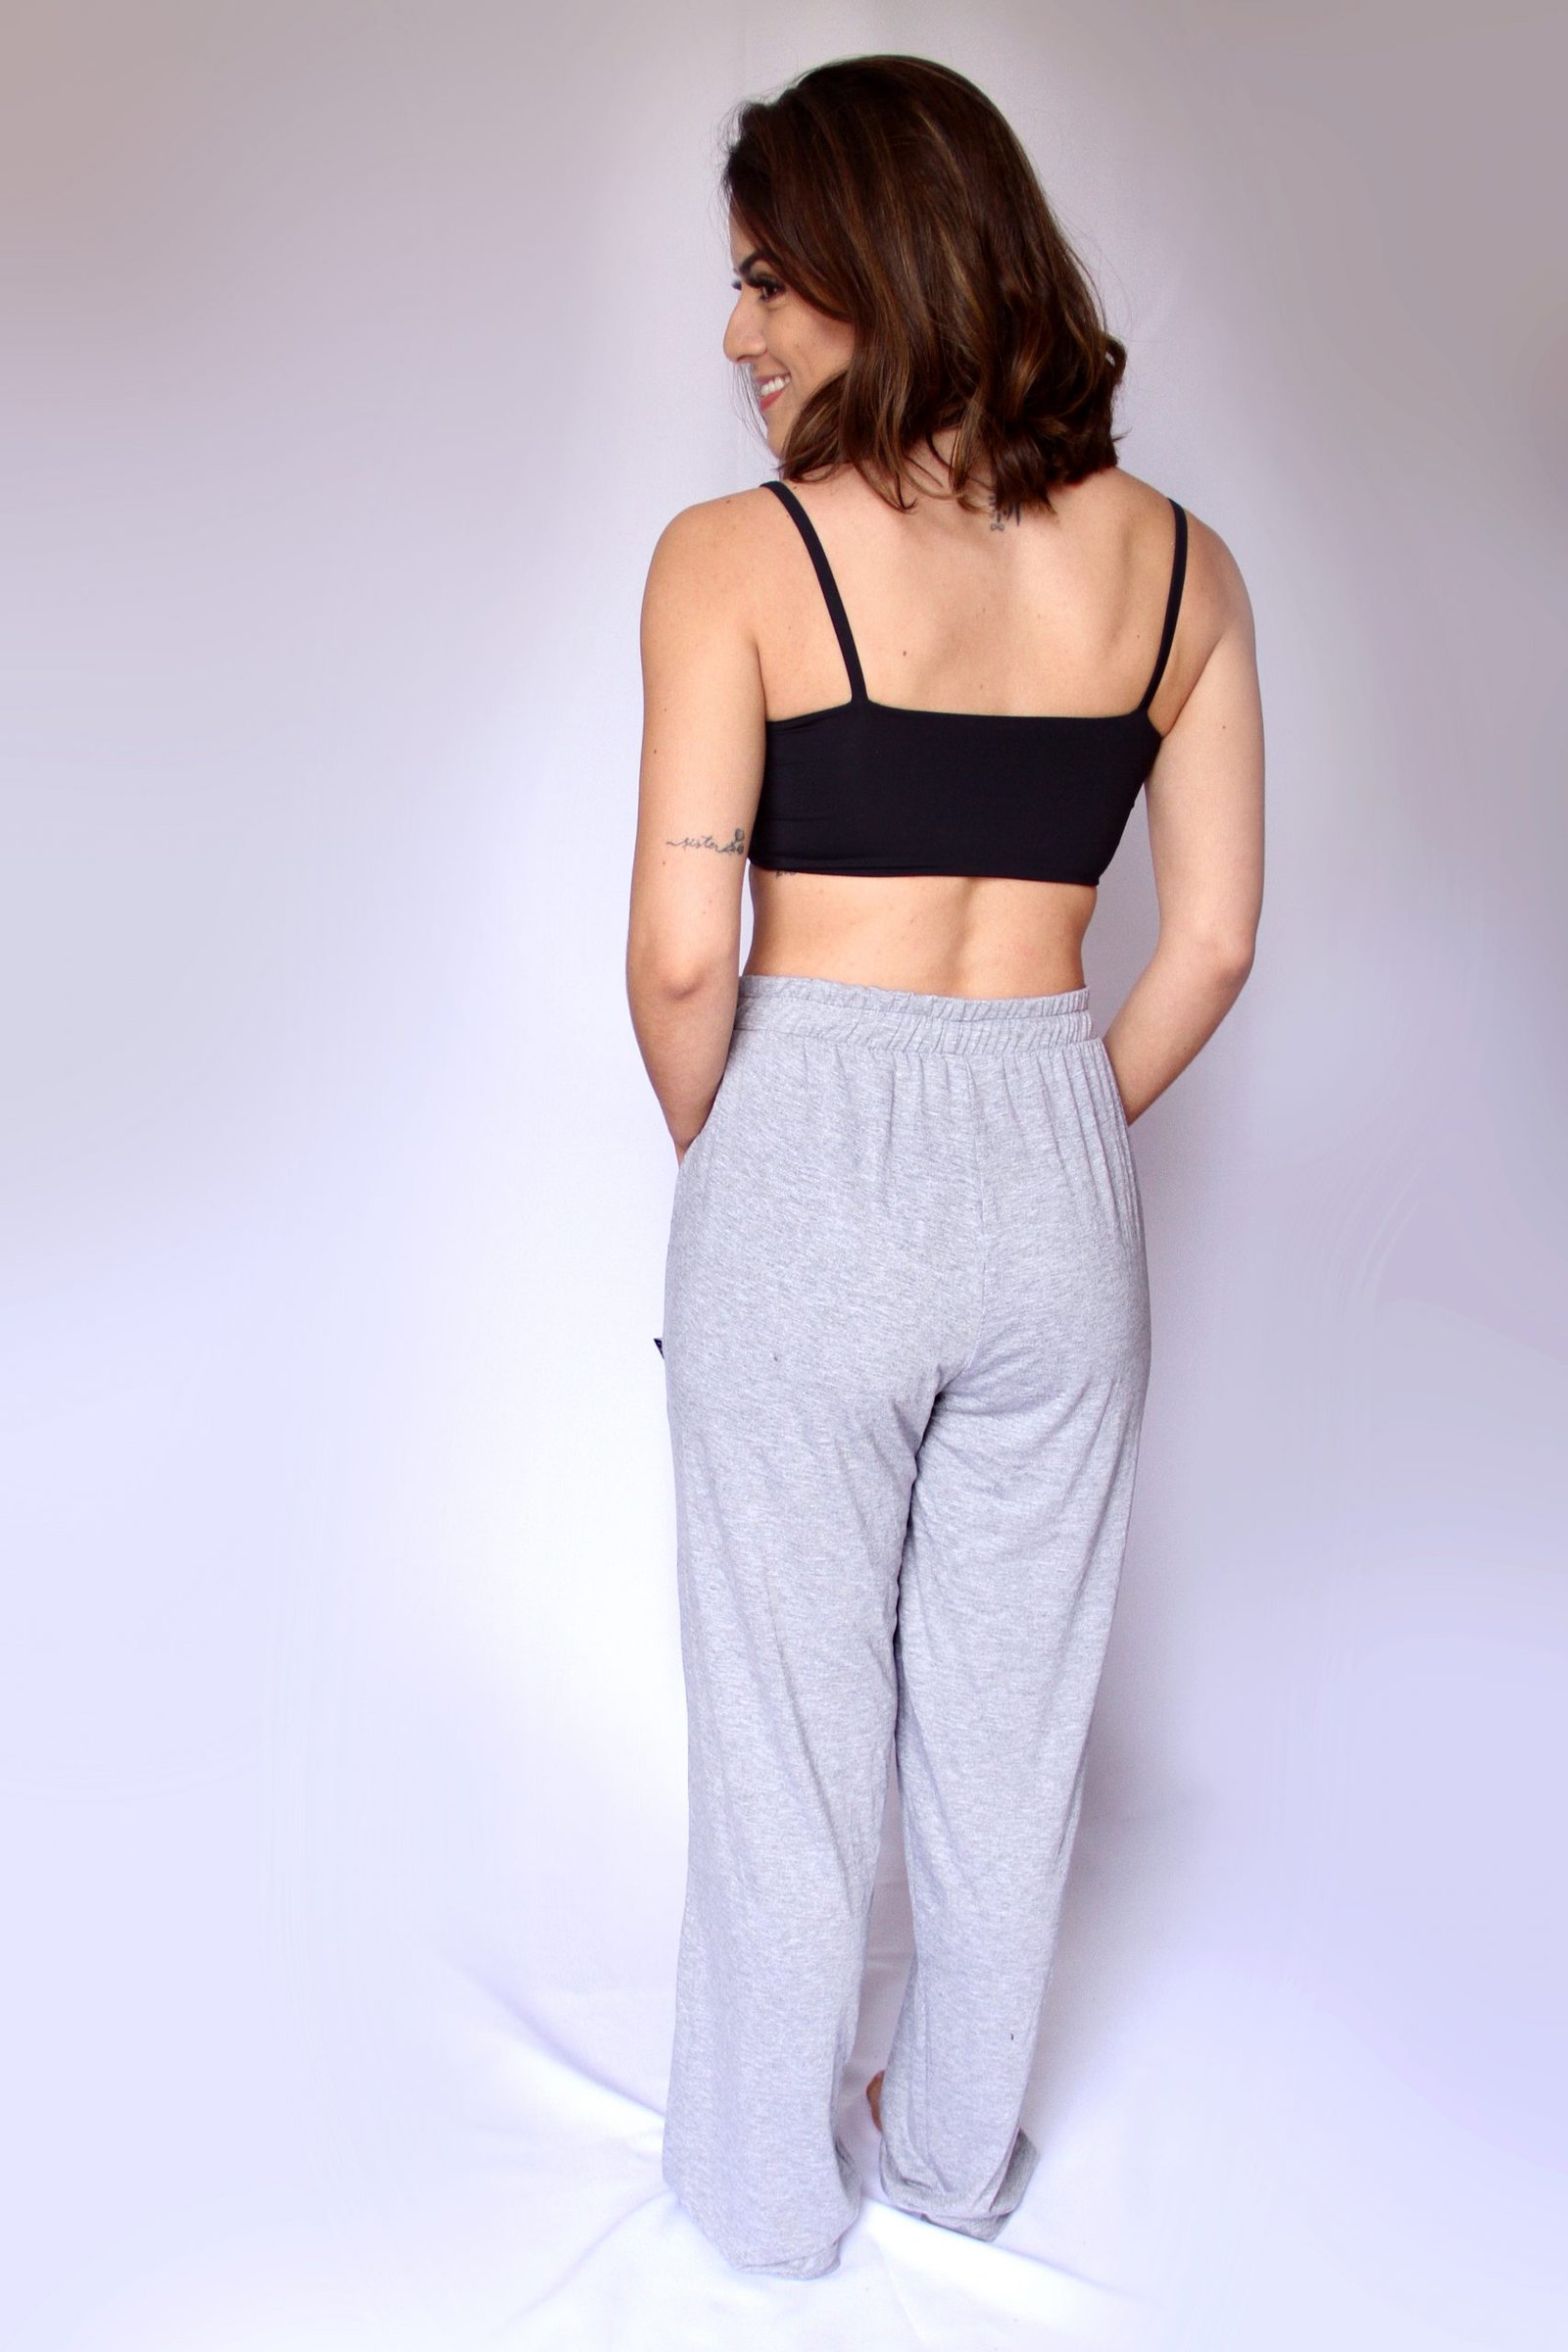 The 6 Best Lounge Pants to Crush Staying at Home! (2021)